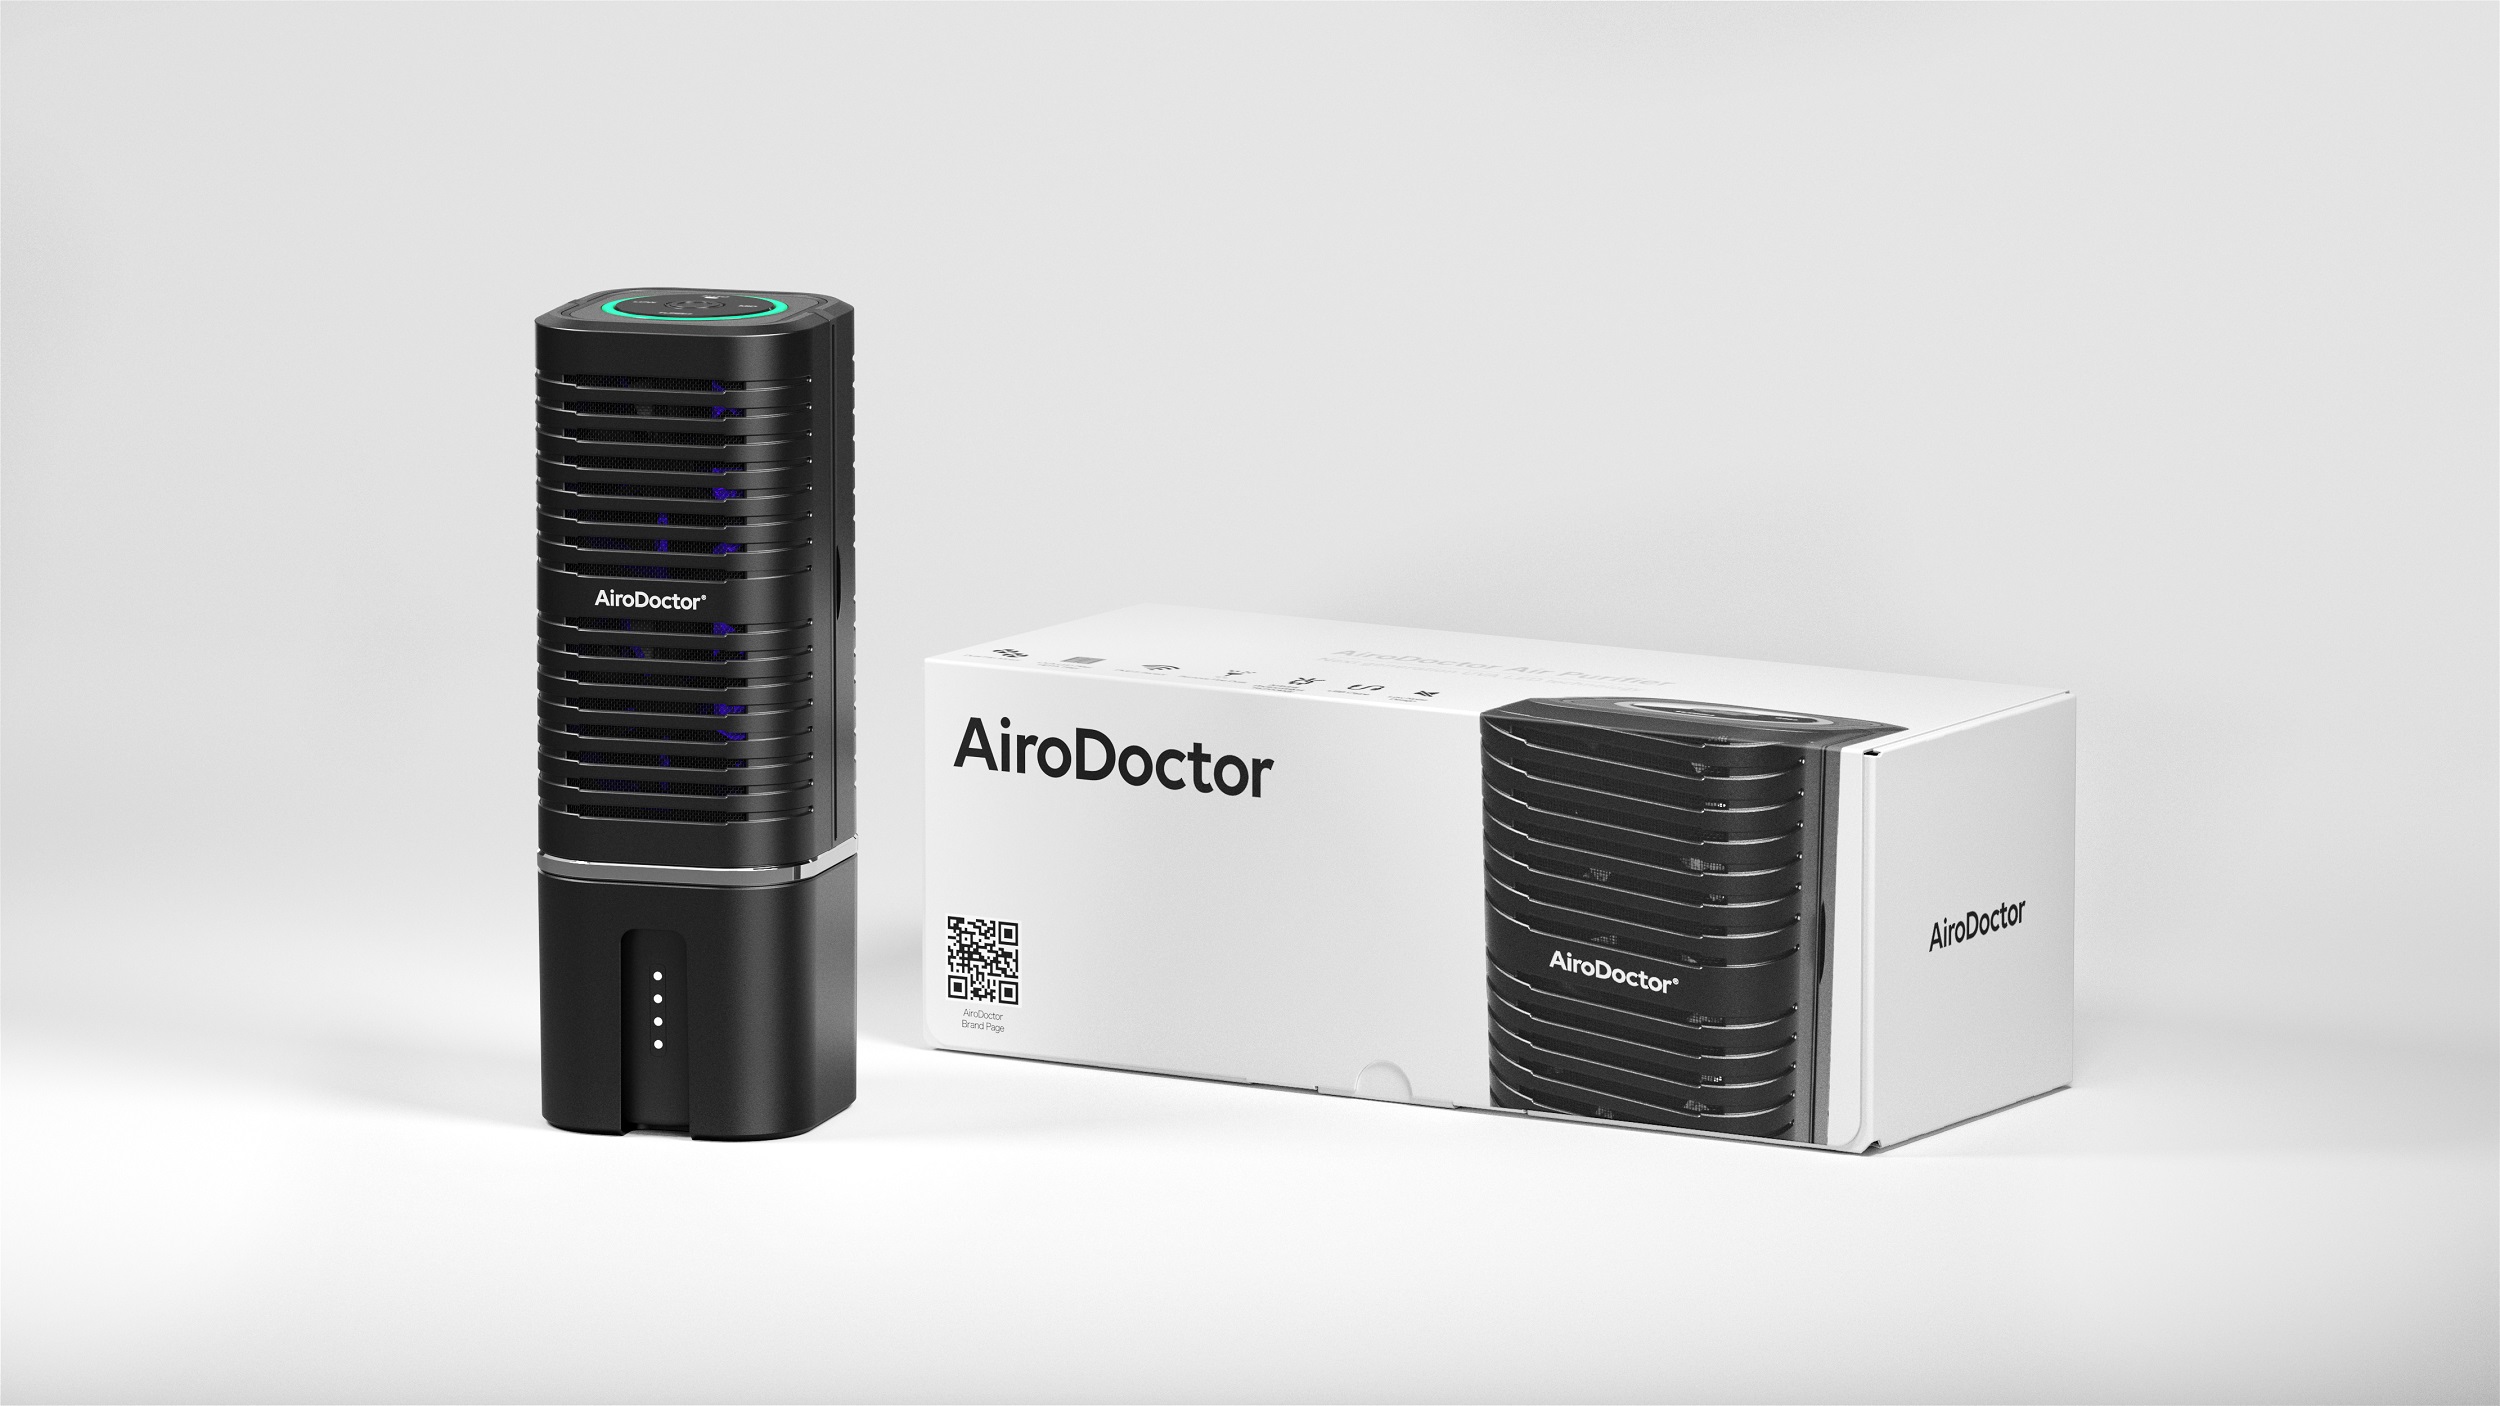 AiroDoctor WAD-S10